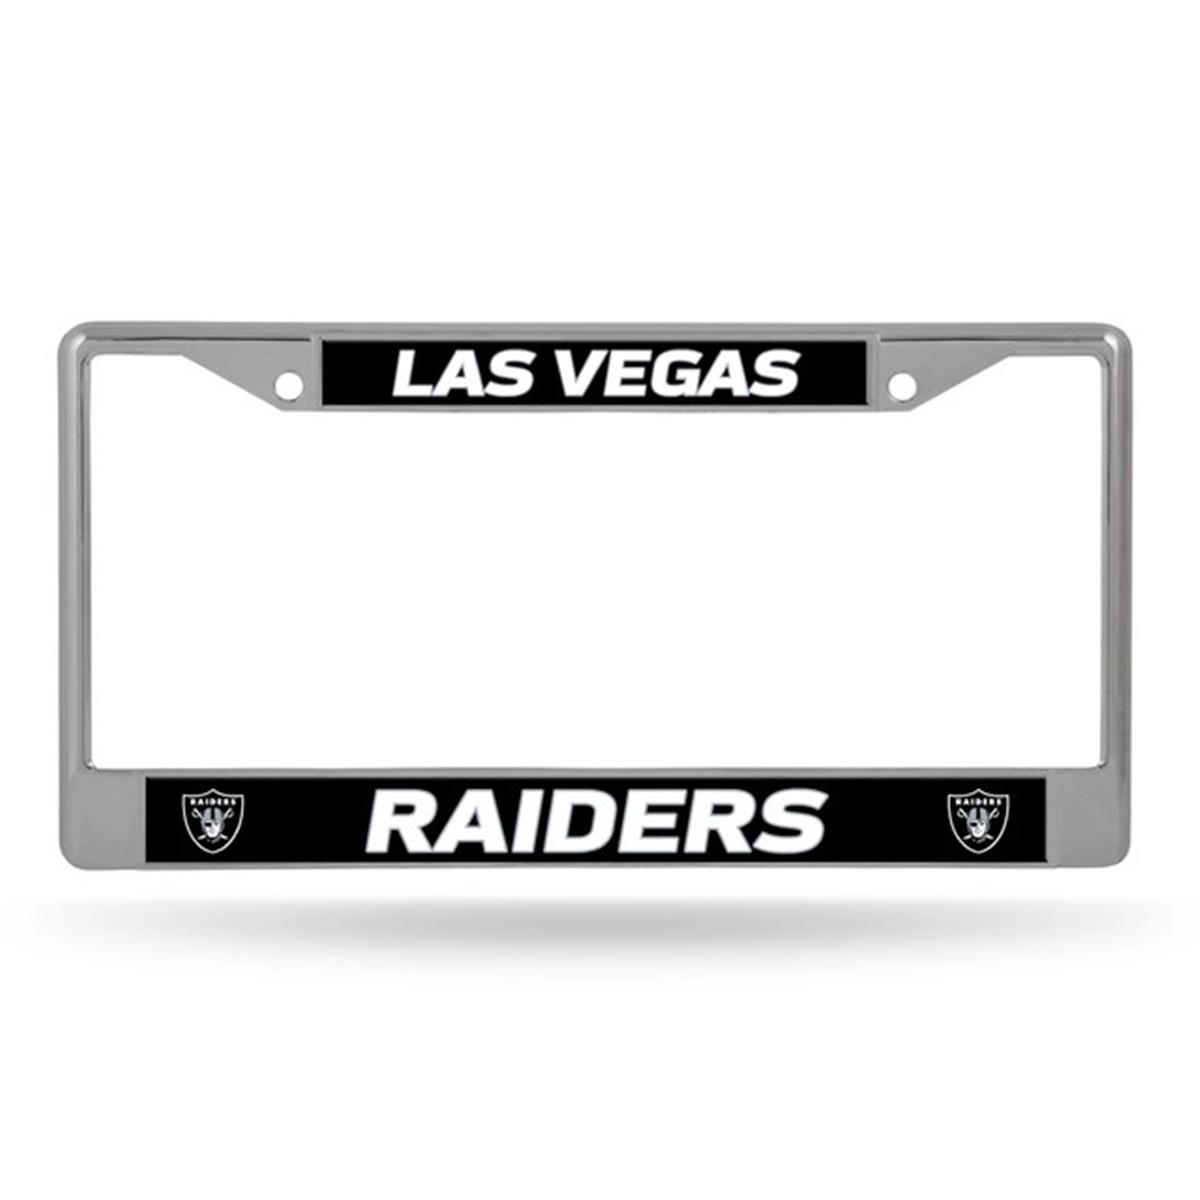 Picture of Rico Industries 1140725484 Las Vegas Raiders License Plate Frame, Chrome